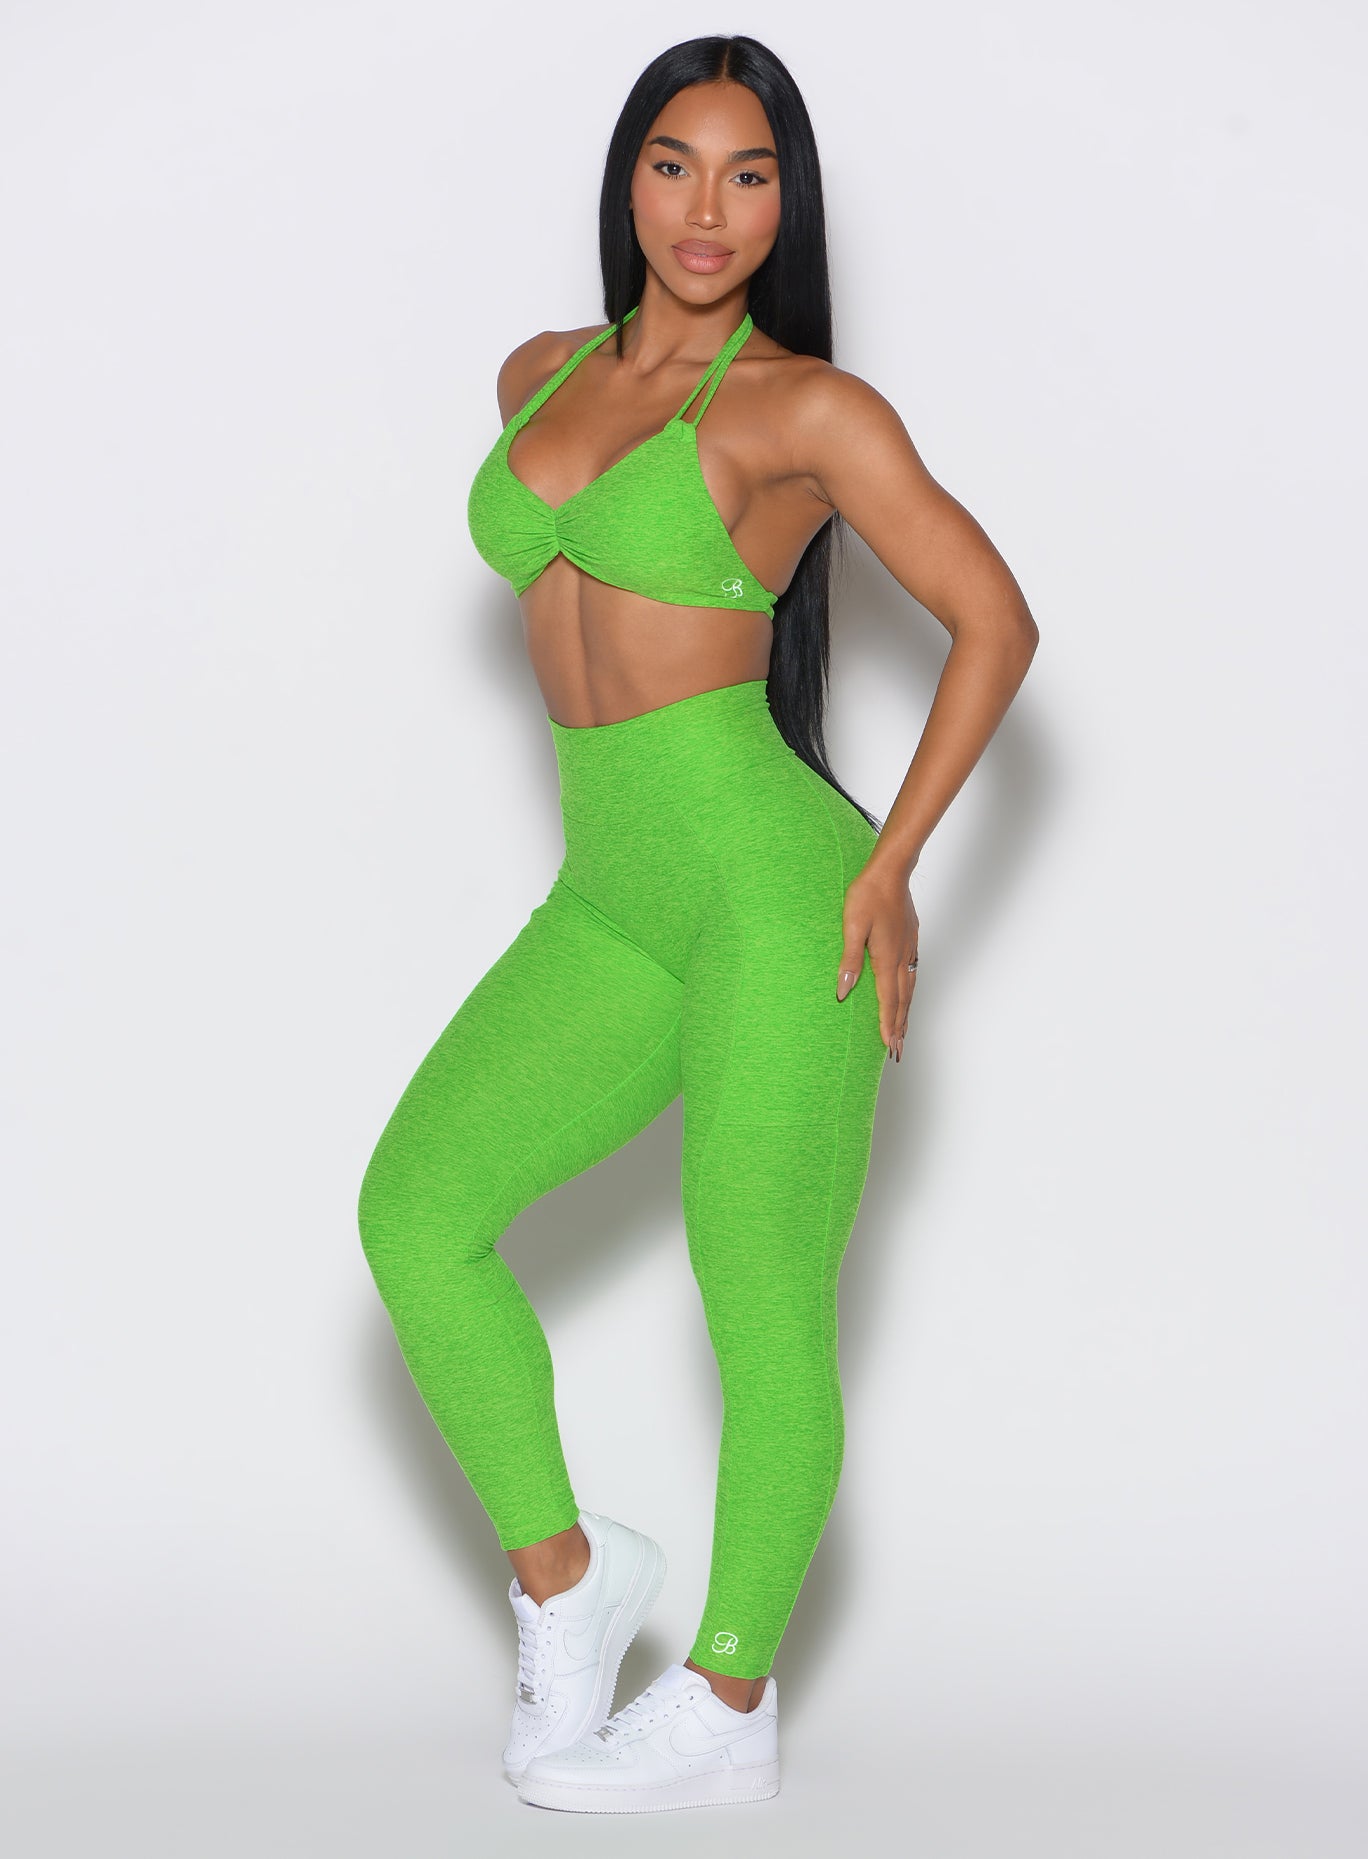 left side profile view of a model angled slightly to her left  wearing our curves leggings in Neon Lime Green color along with the matching sports bra